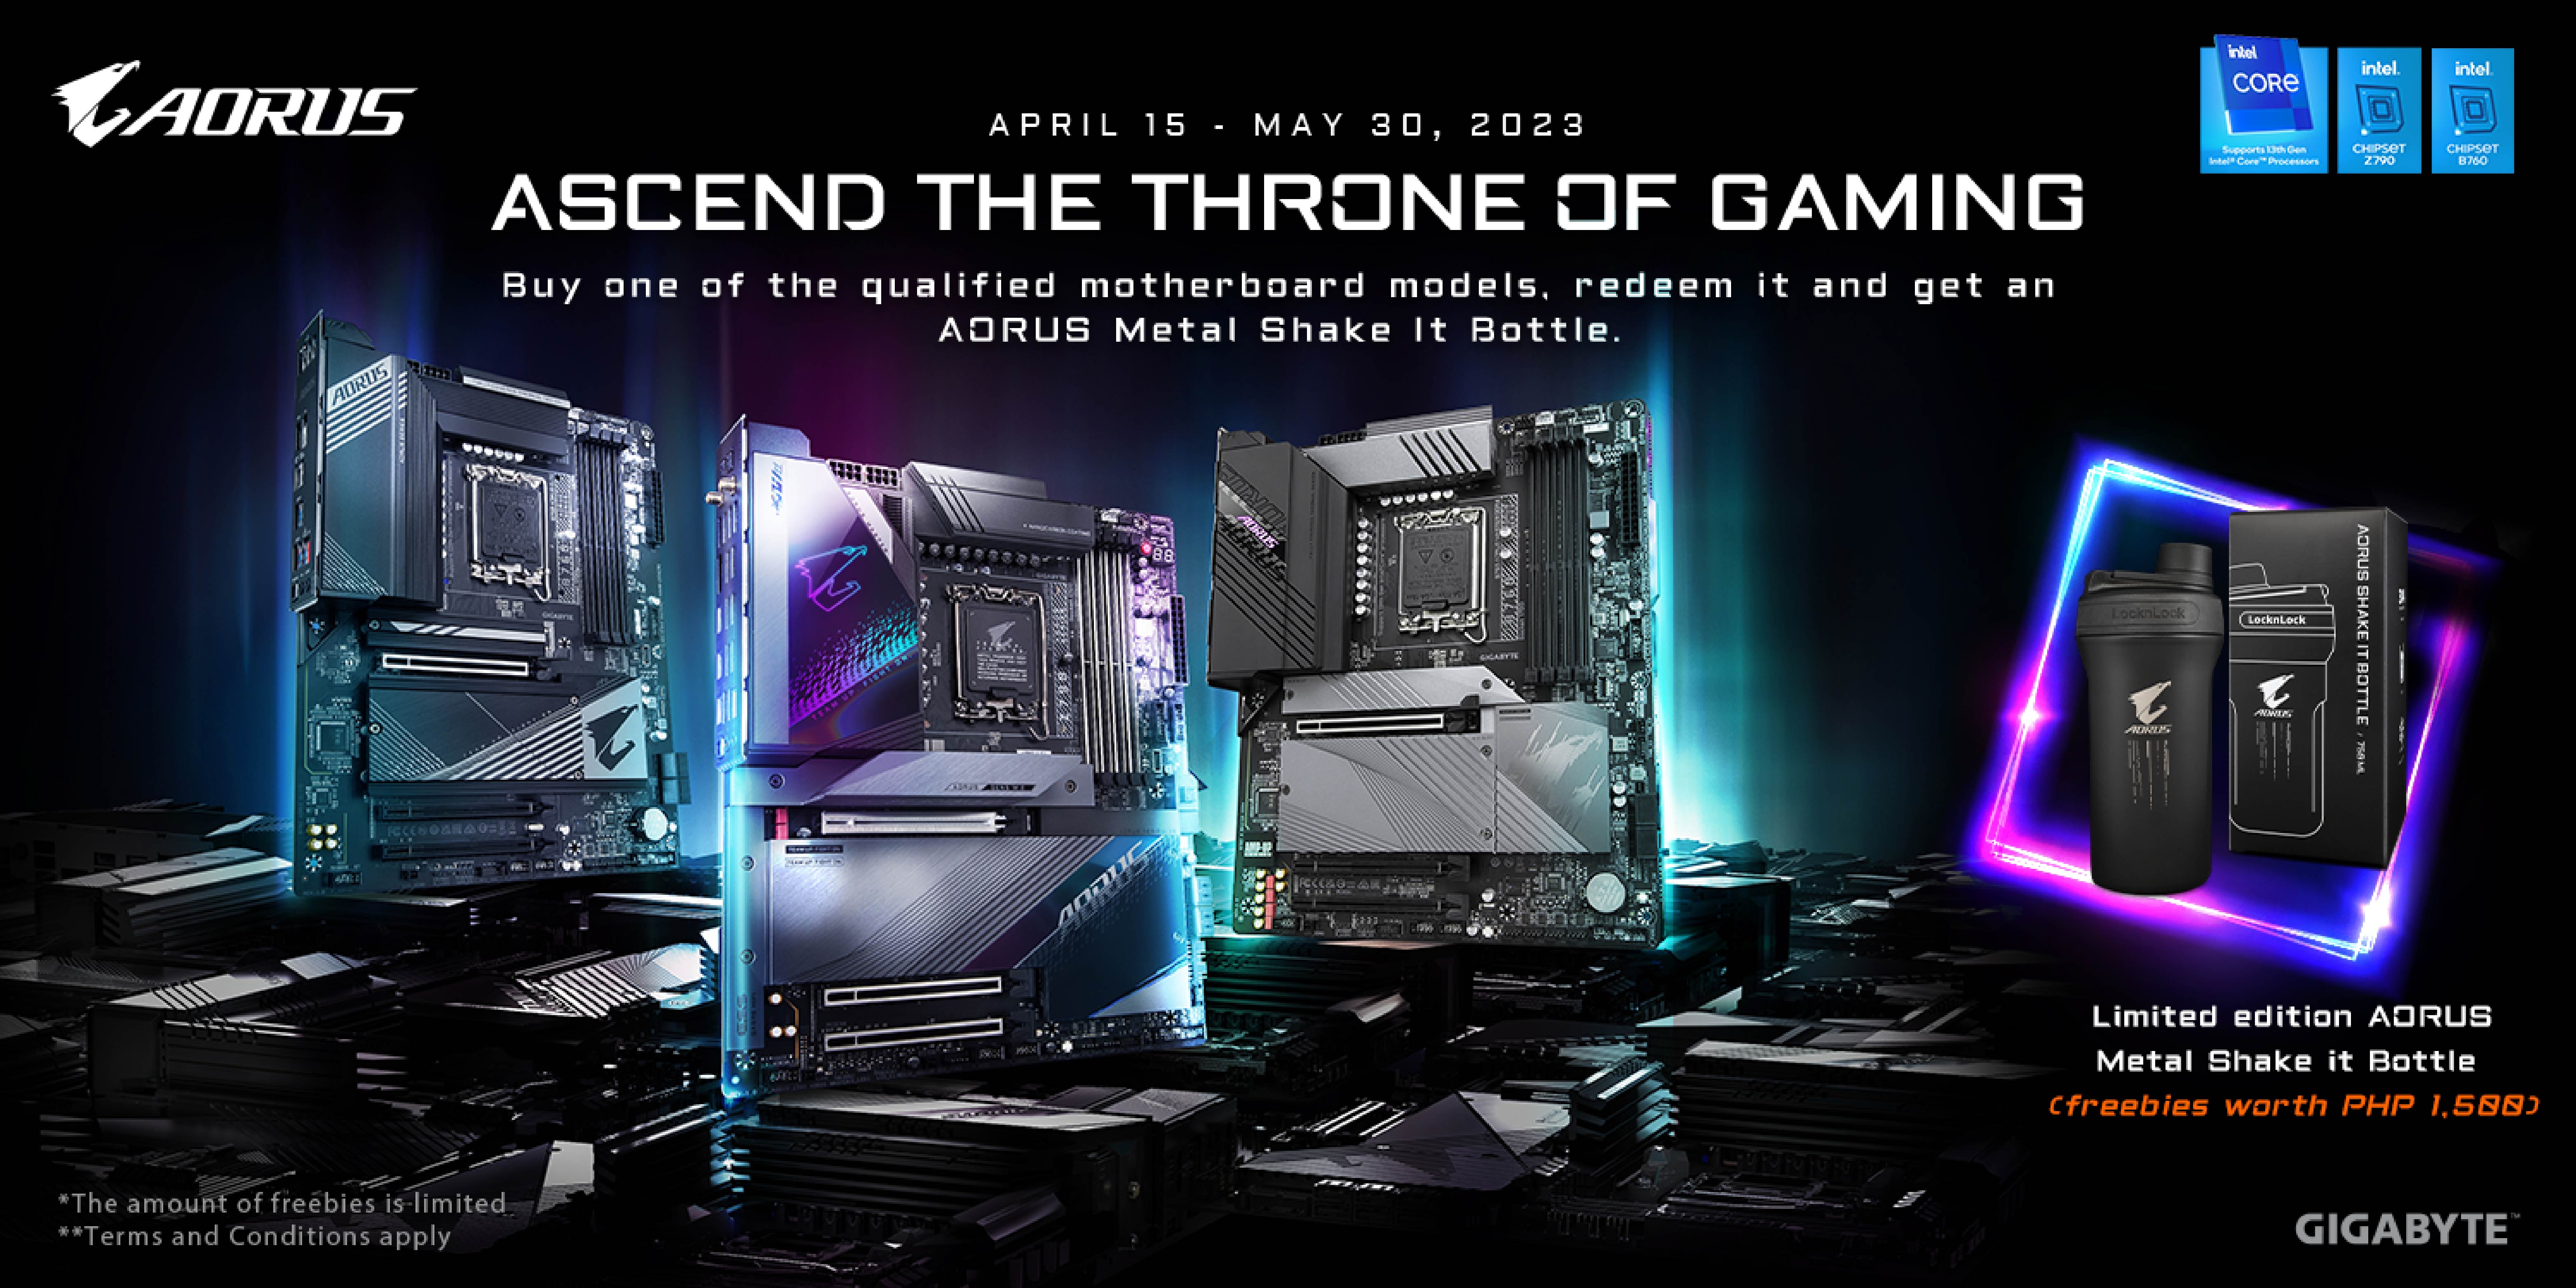 [PH] ASCEND THE THRONE OF GAMING PROMO